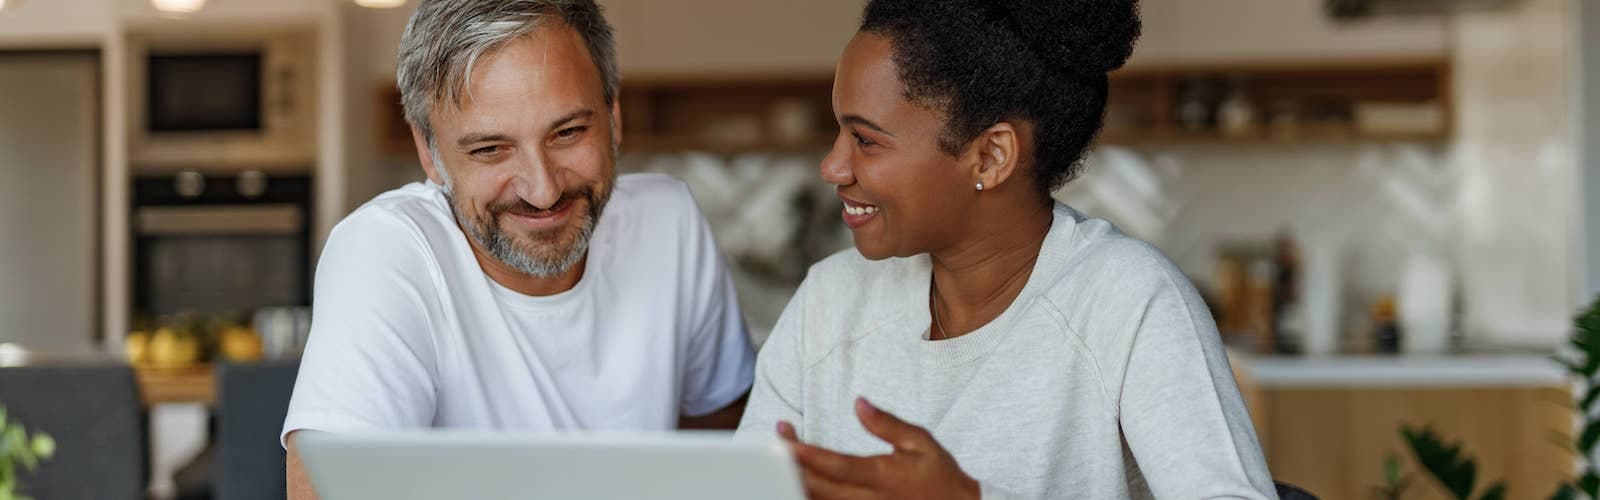 A man and a women looking at the laptop and smiling.